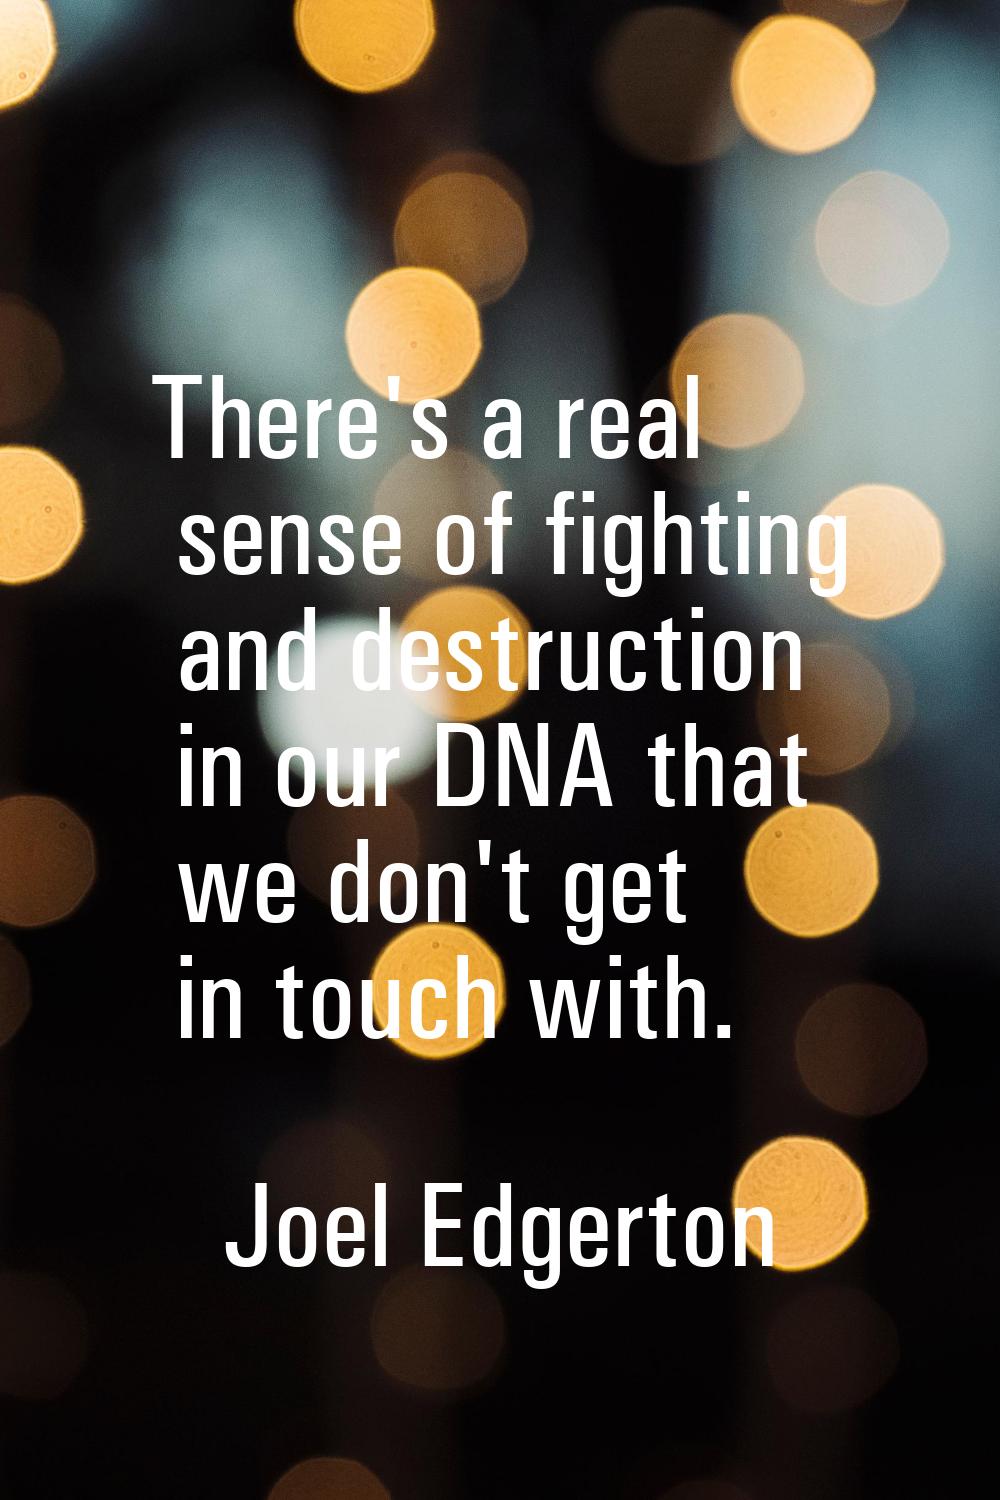 There's a real sense of fighting and destruction in our DNA that we don't get in touch with.